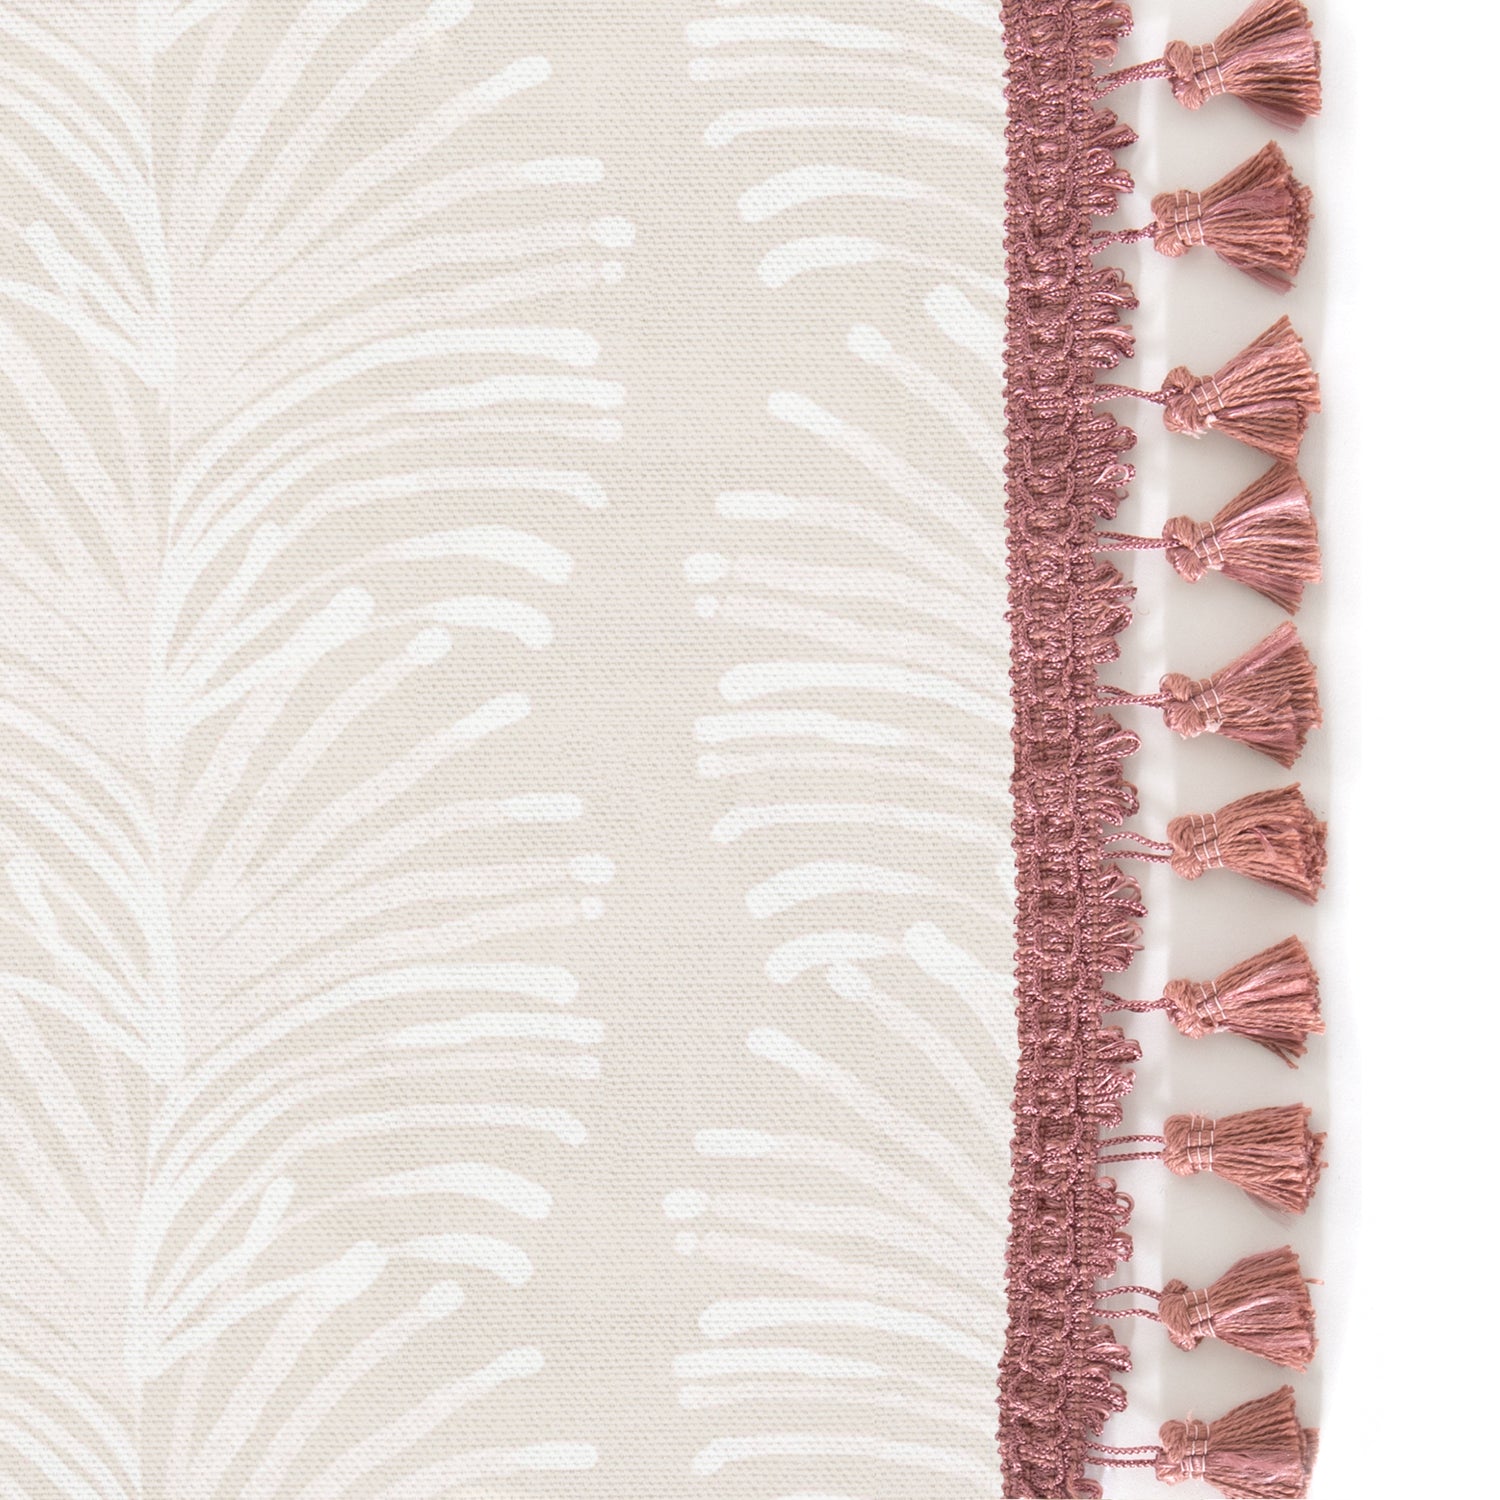 Upclose picture of Emma Sand custom curtain with dusty rose tassel trim